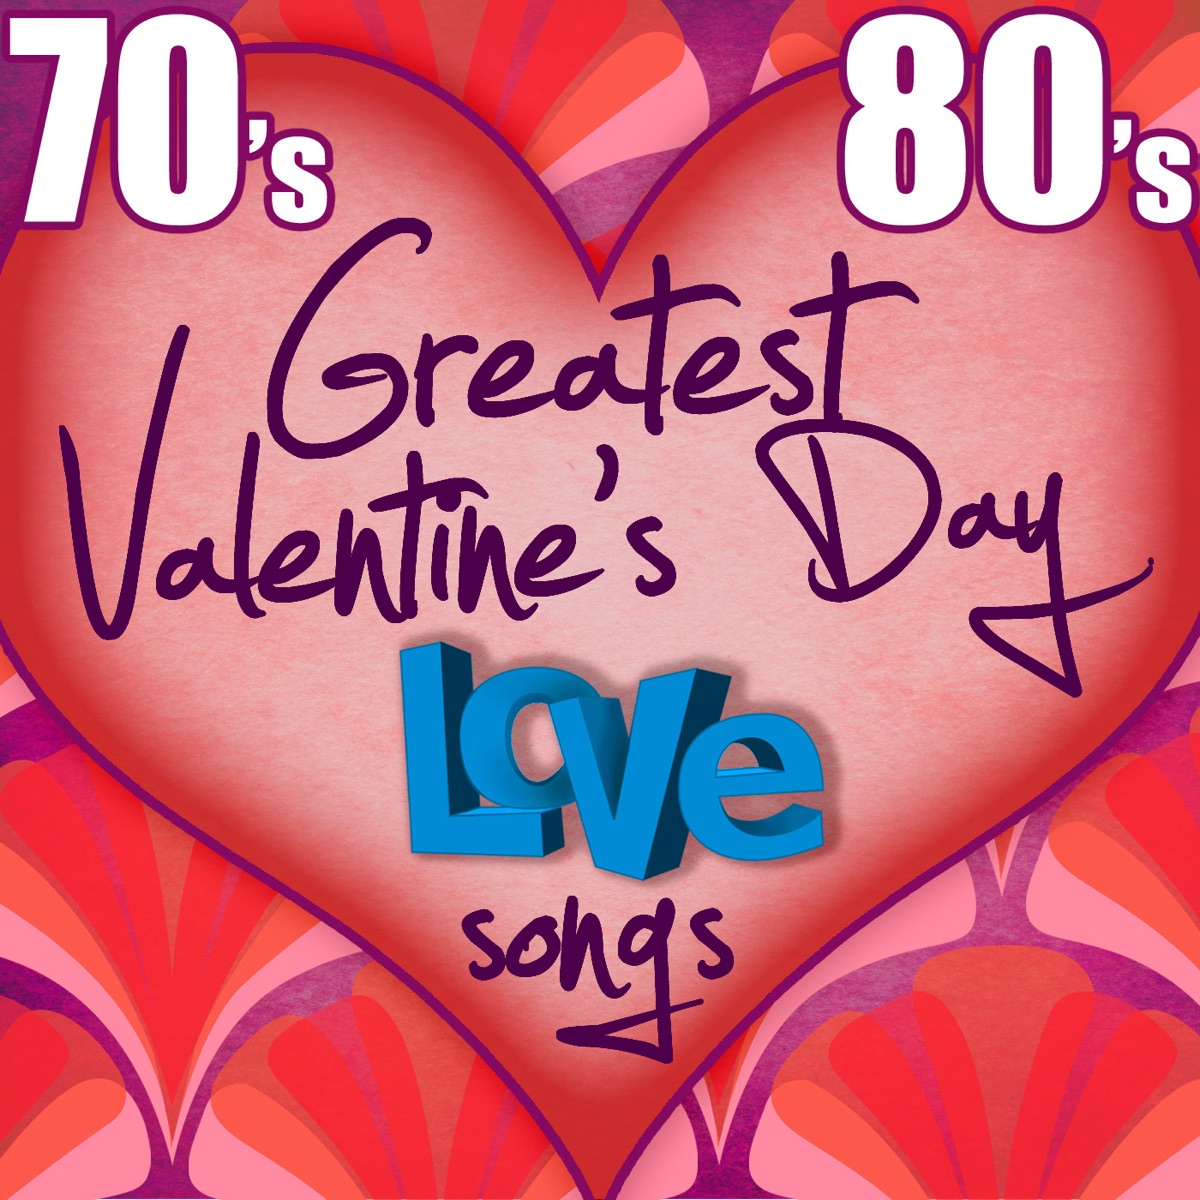 Top 20 Romantic Love Songs of The '60s & '70s - Album by Various